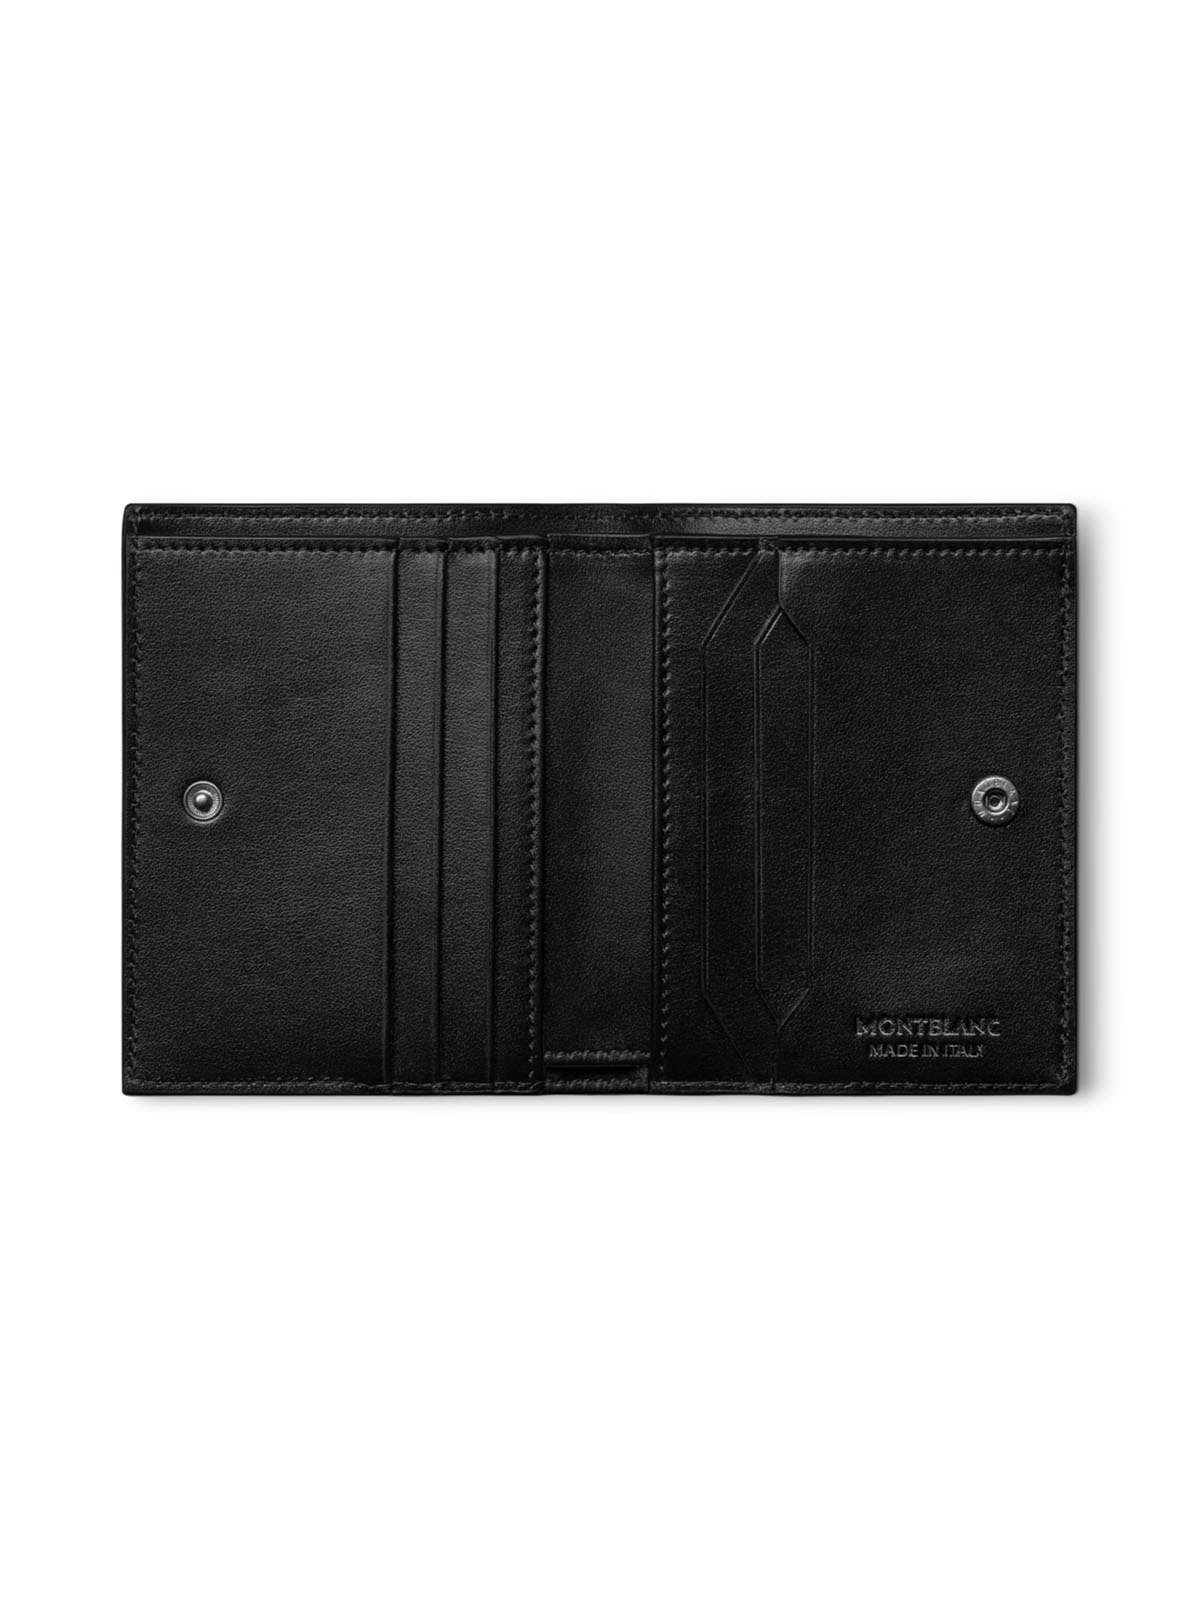 Montblanc Extreme 3.0 Black Leather Wallet MB129975